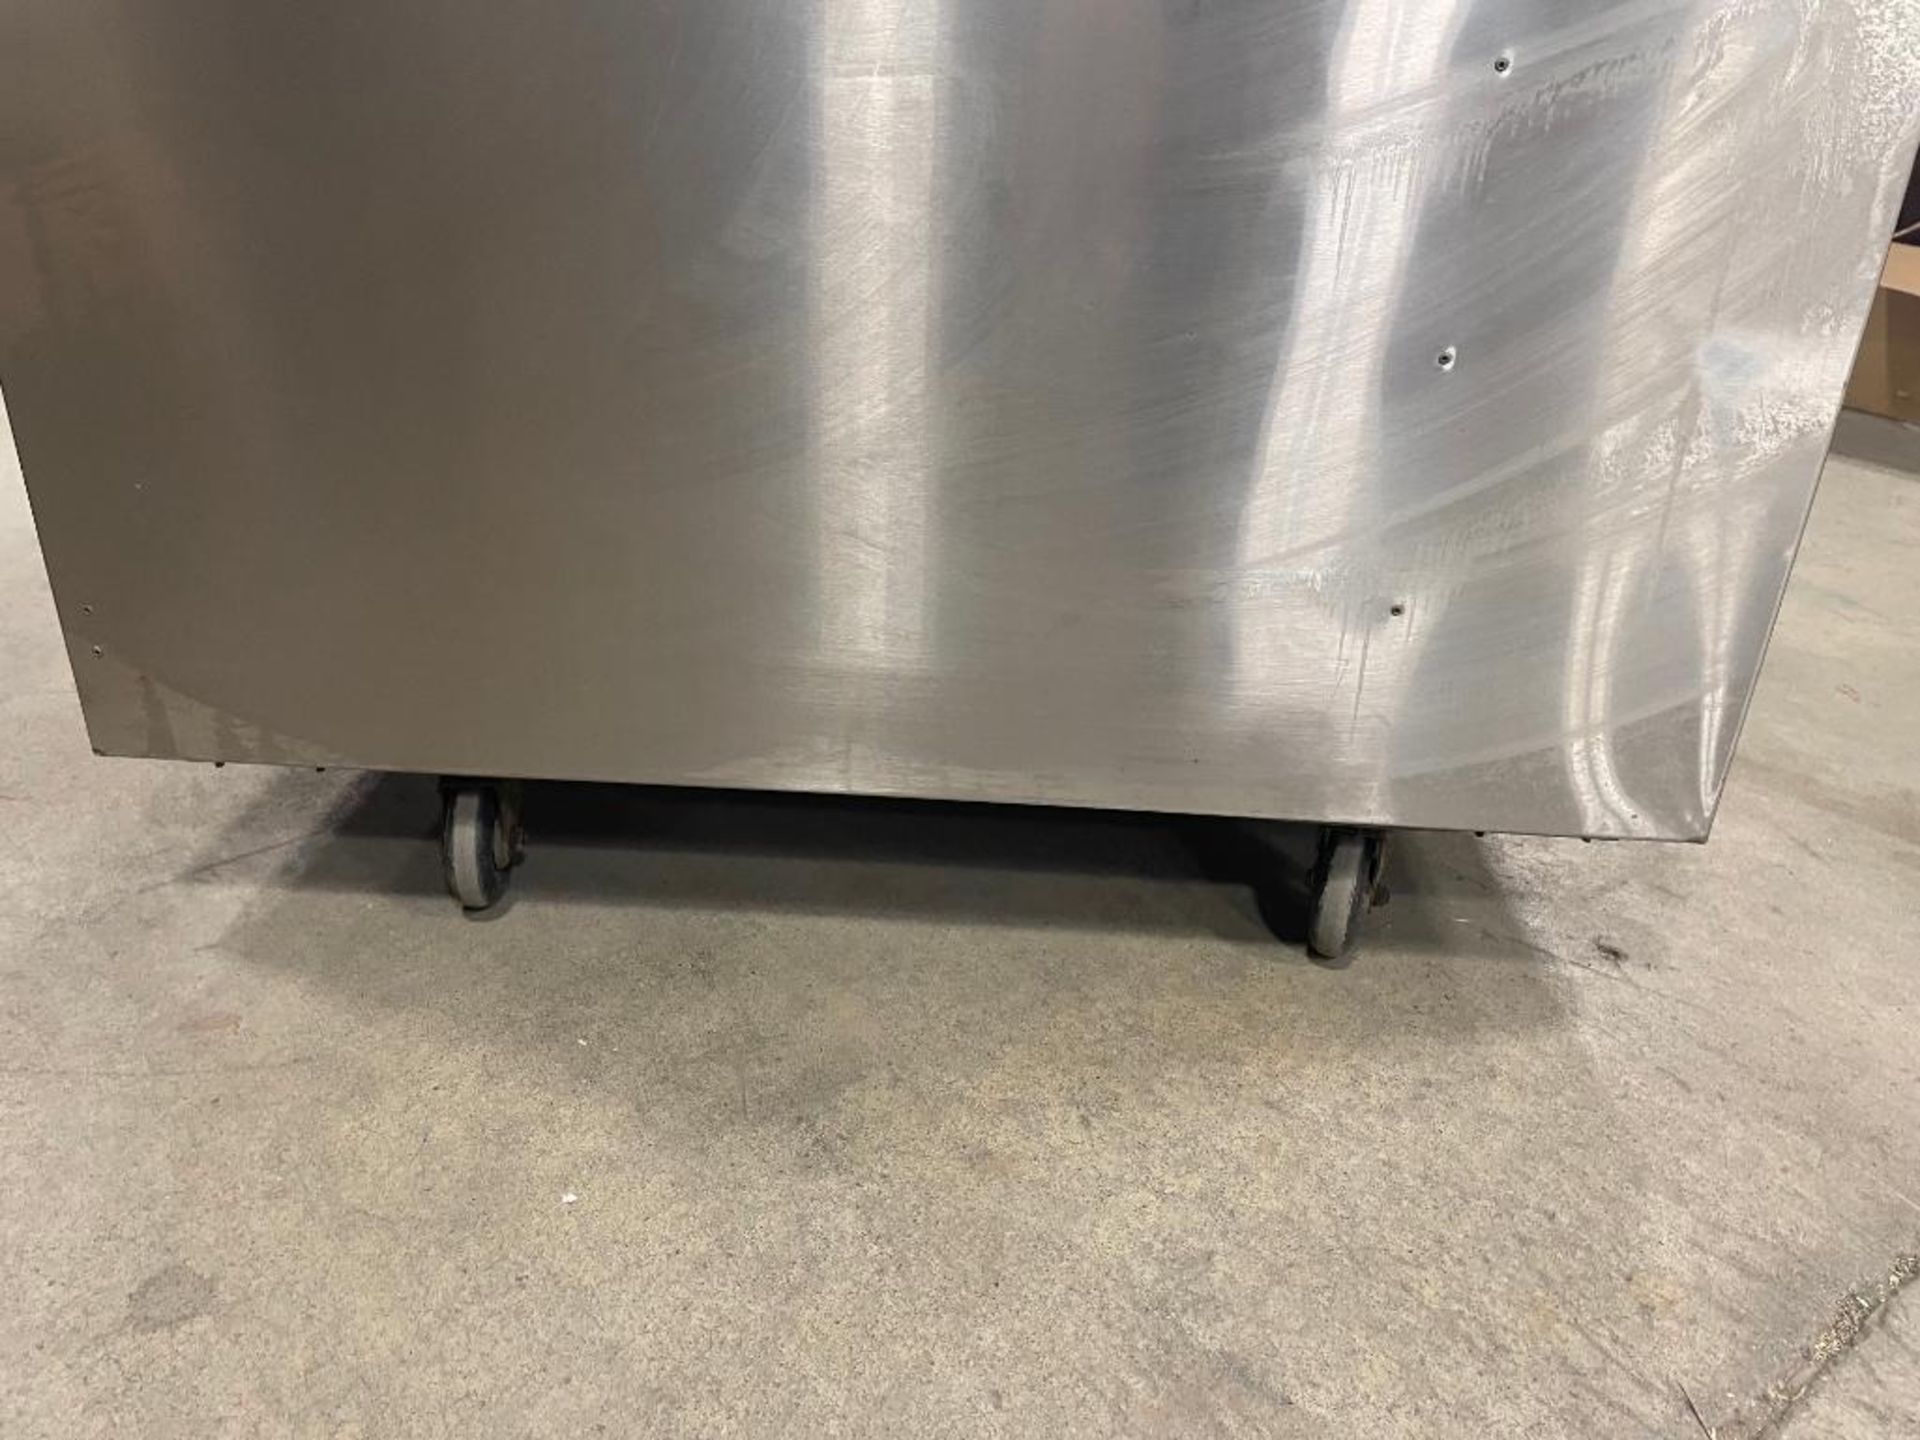 QUEST CUSTOM STAINLESS STEEL MOBILE CART WITH PLATE LOWERATOR - Image 12 of 12